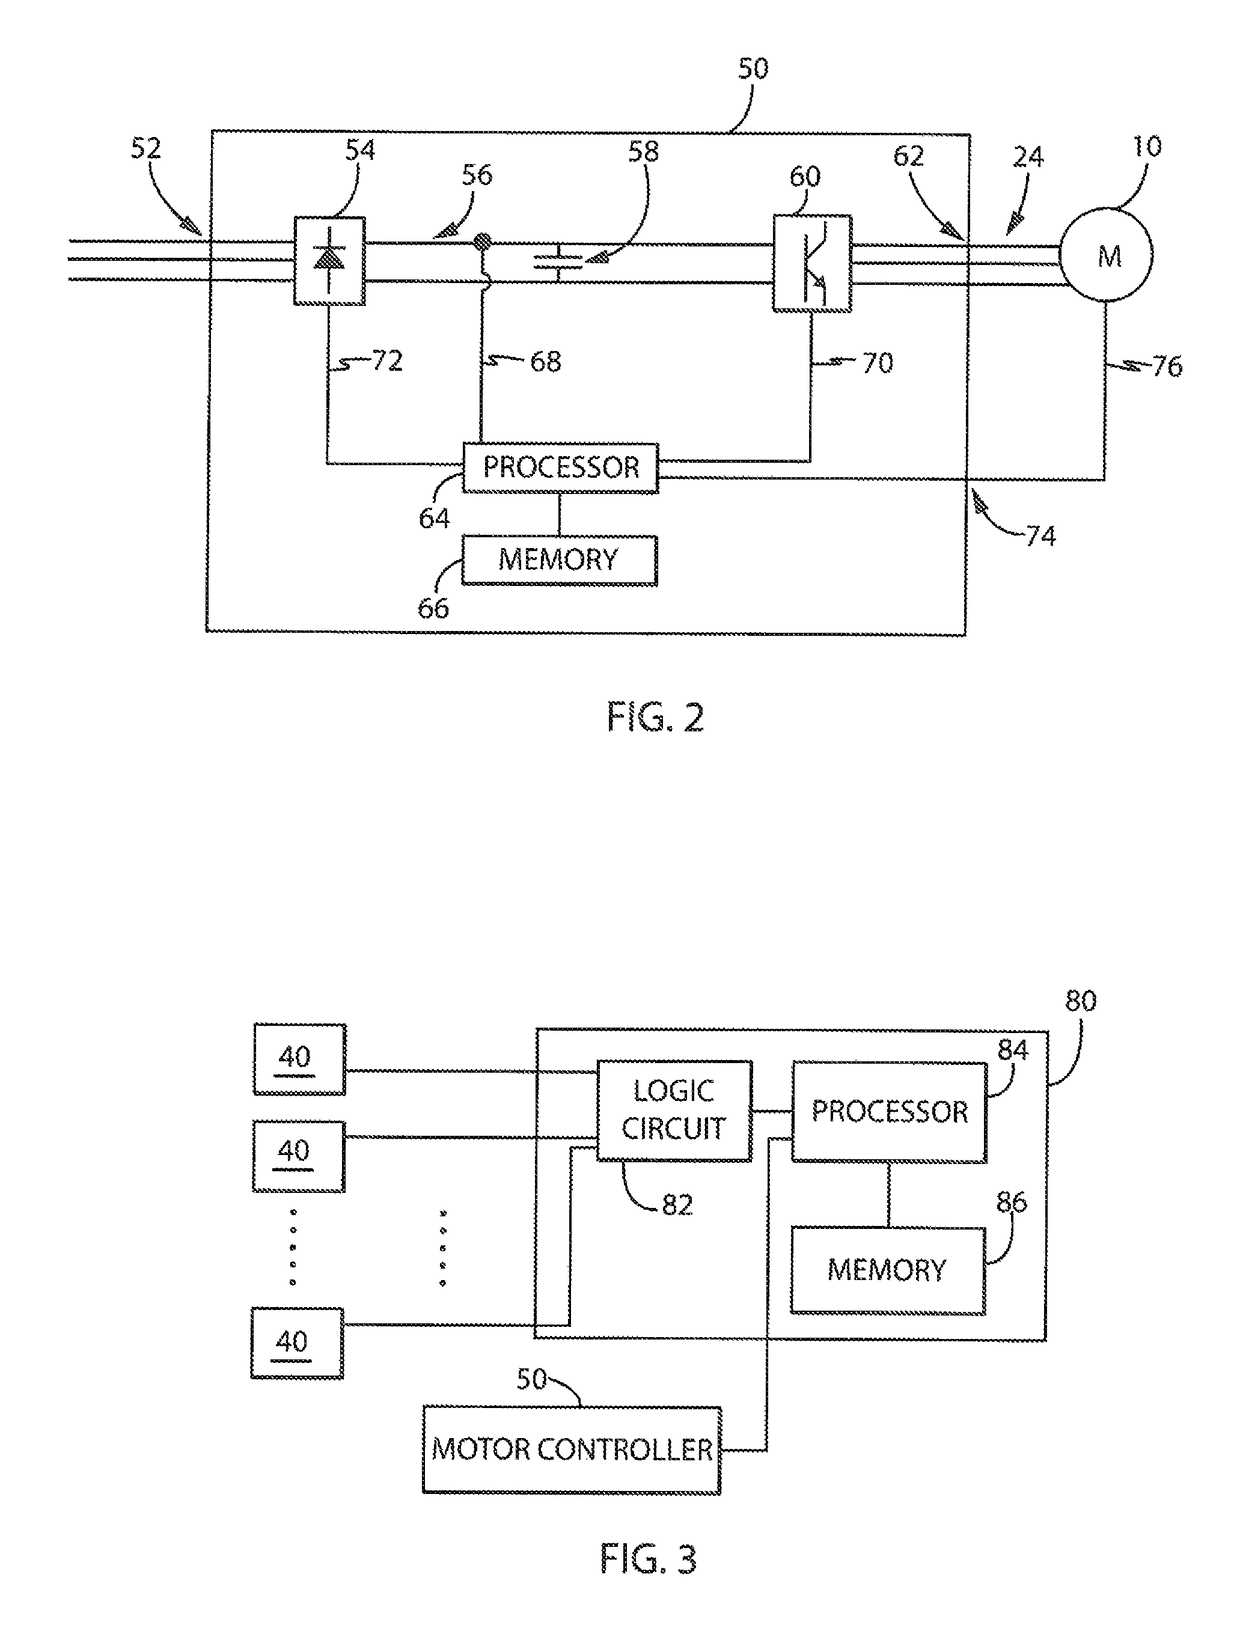 System and method for detection of motor vibration